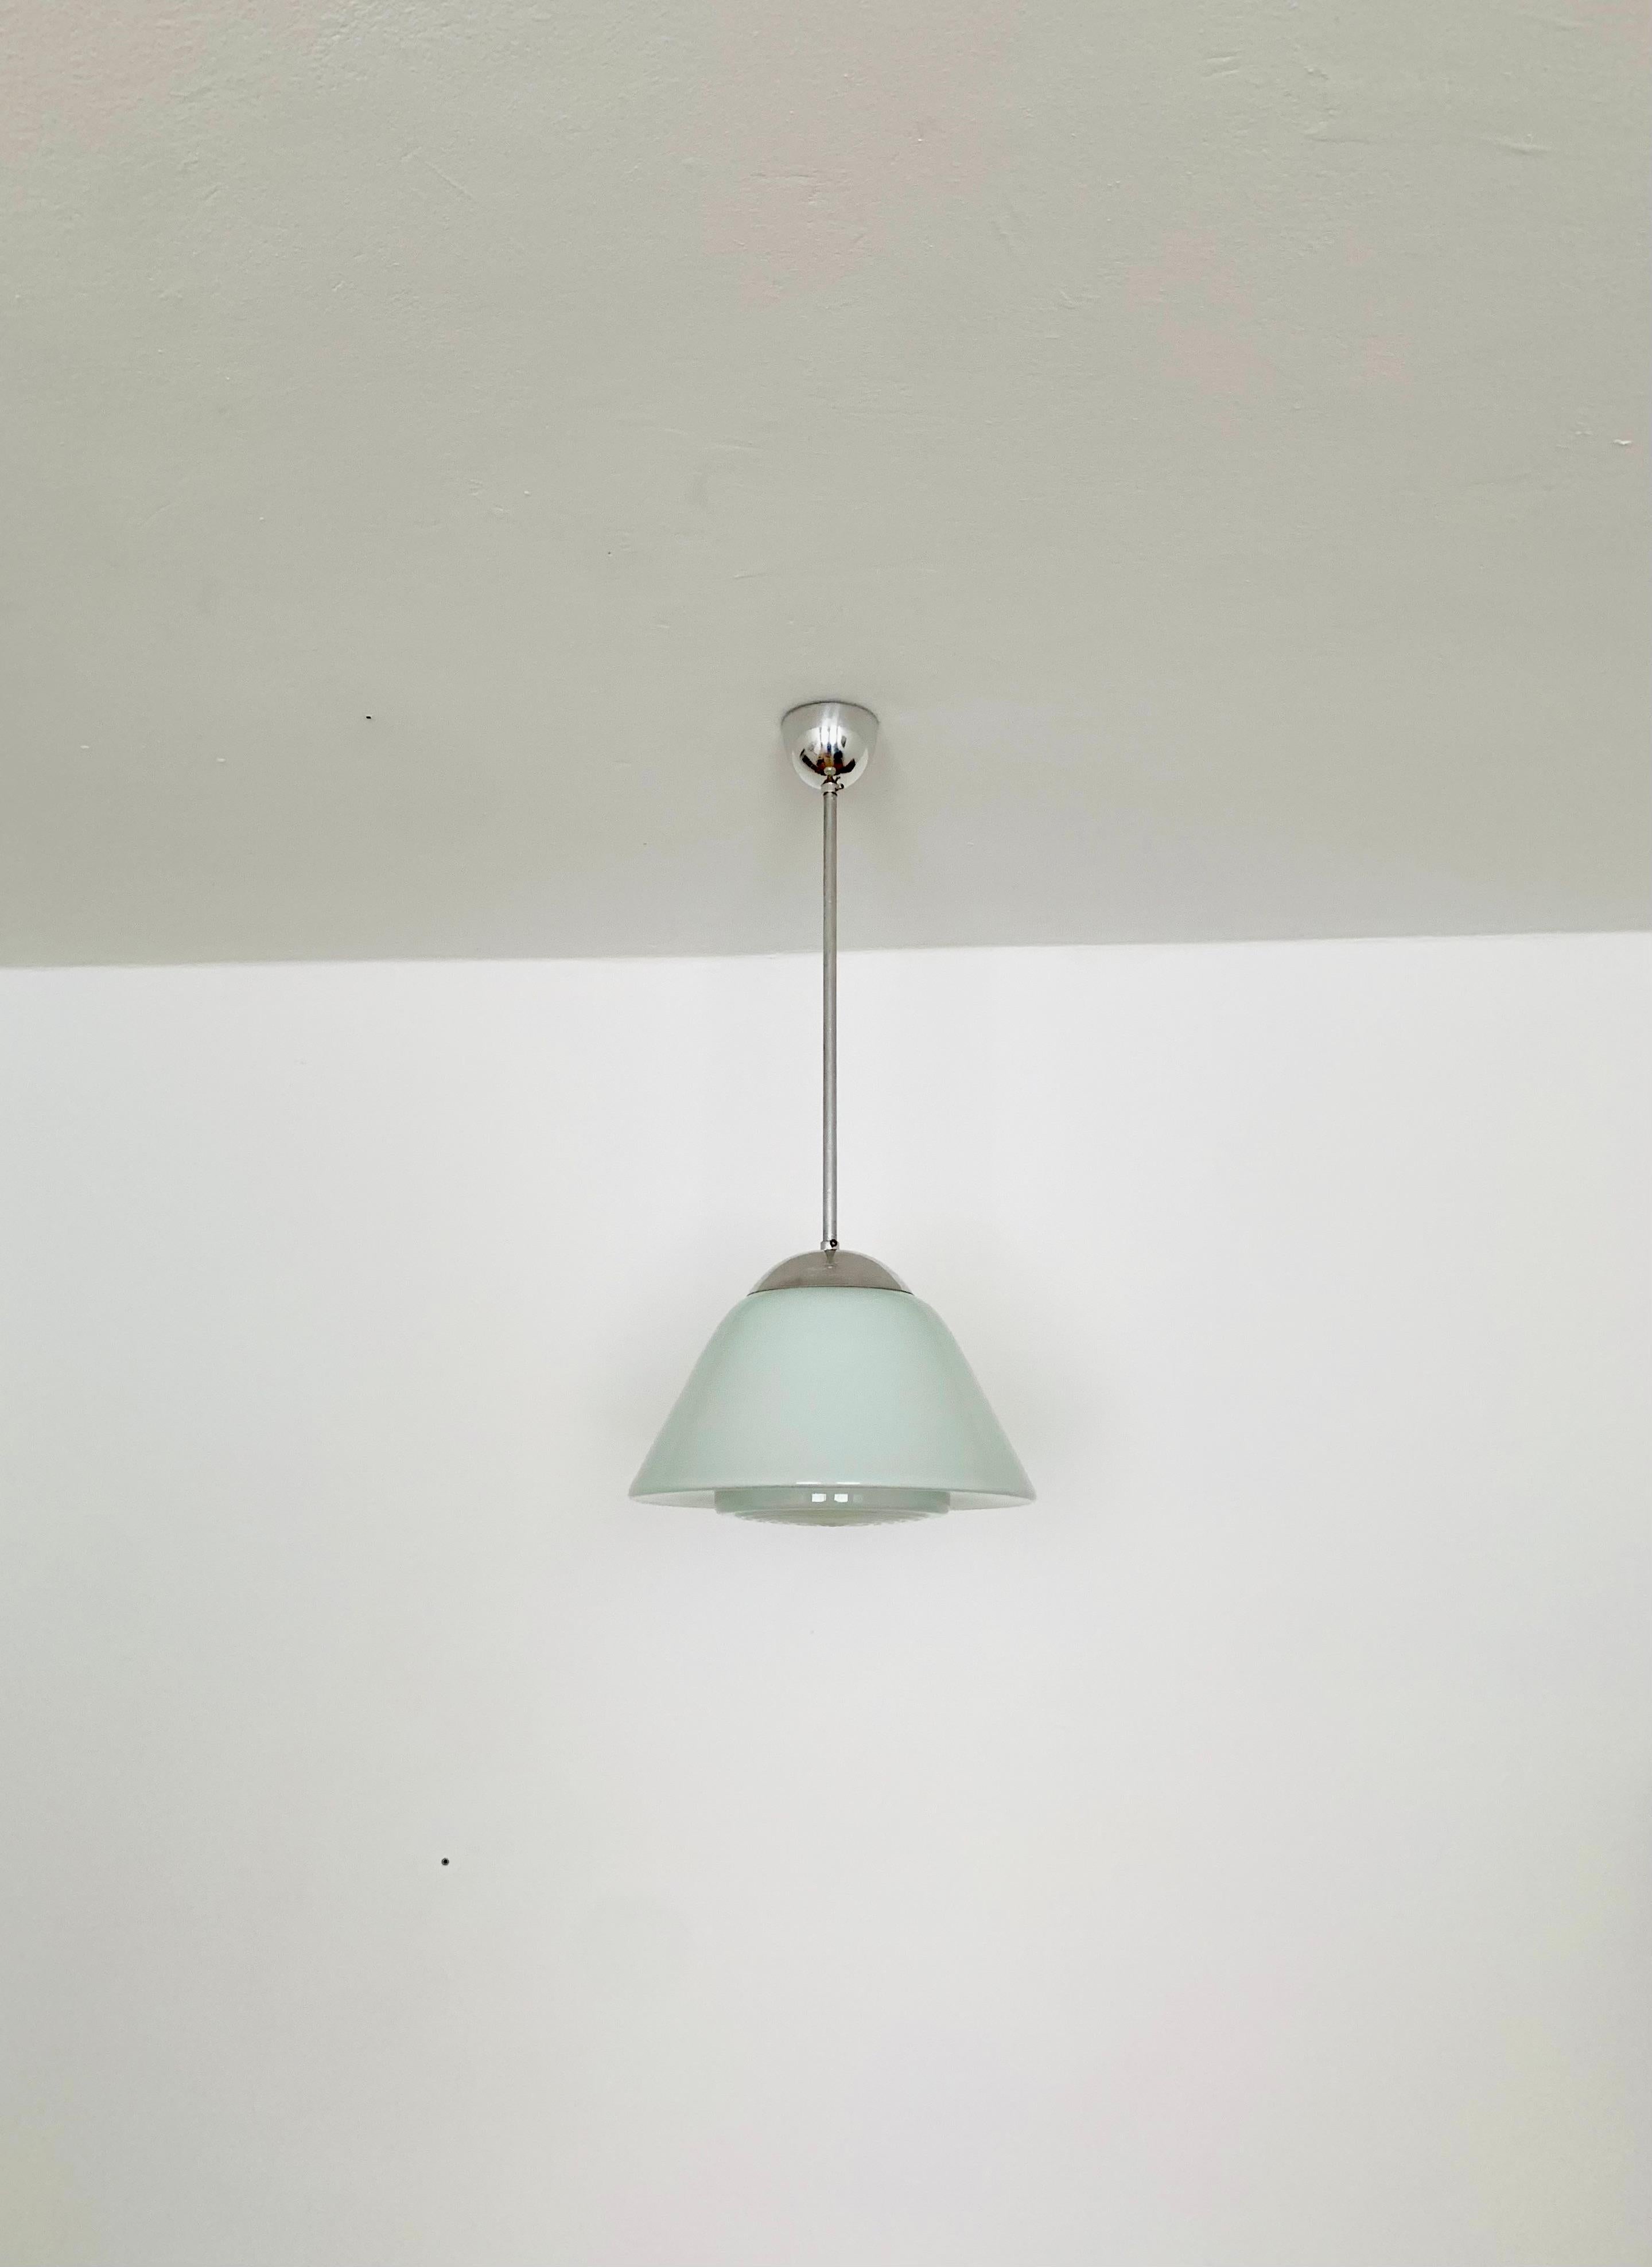 Exceptionally beautiful ceiling lamp from the 1950s.
The lamp emits a very pleasant, warm light.
Wonderful shape and a timeless classic.

Manufacturer: Peill and Putzler
Design: Prof. Wilhelm Wagenfeld

Condition:

Very good vintage condition with